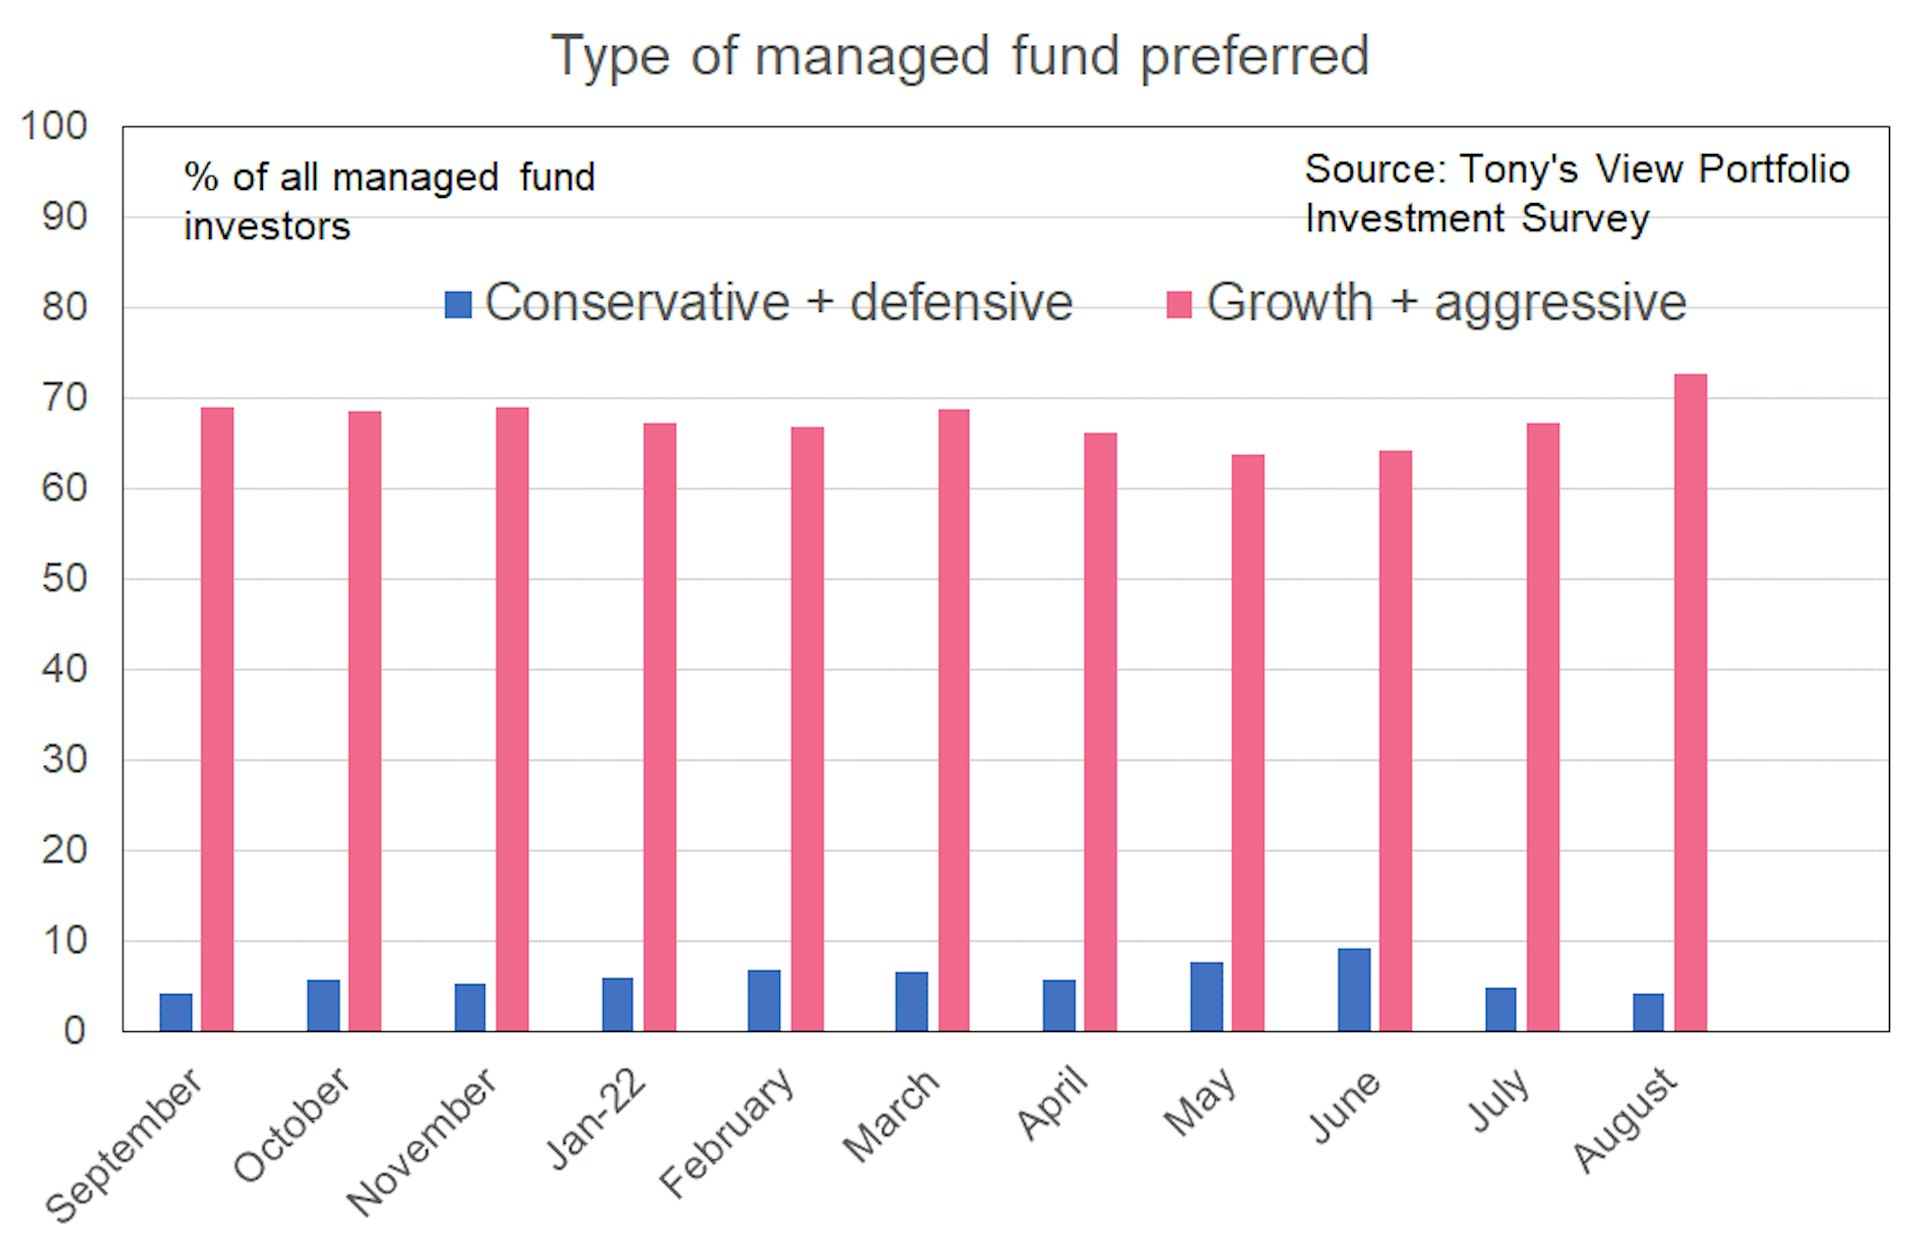 Bar graph showing type of managed fund preferred by respondents—either conservative + defensive, or growth + aggressive. Preference toward growth managed funds grew to a high of 71%, while preference toward defensive managed funds fell to 4%.